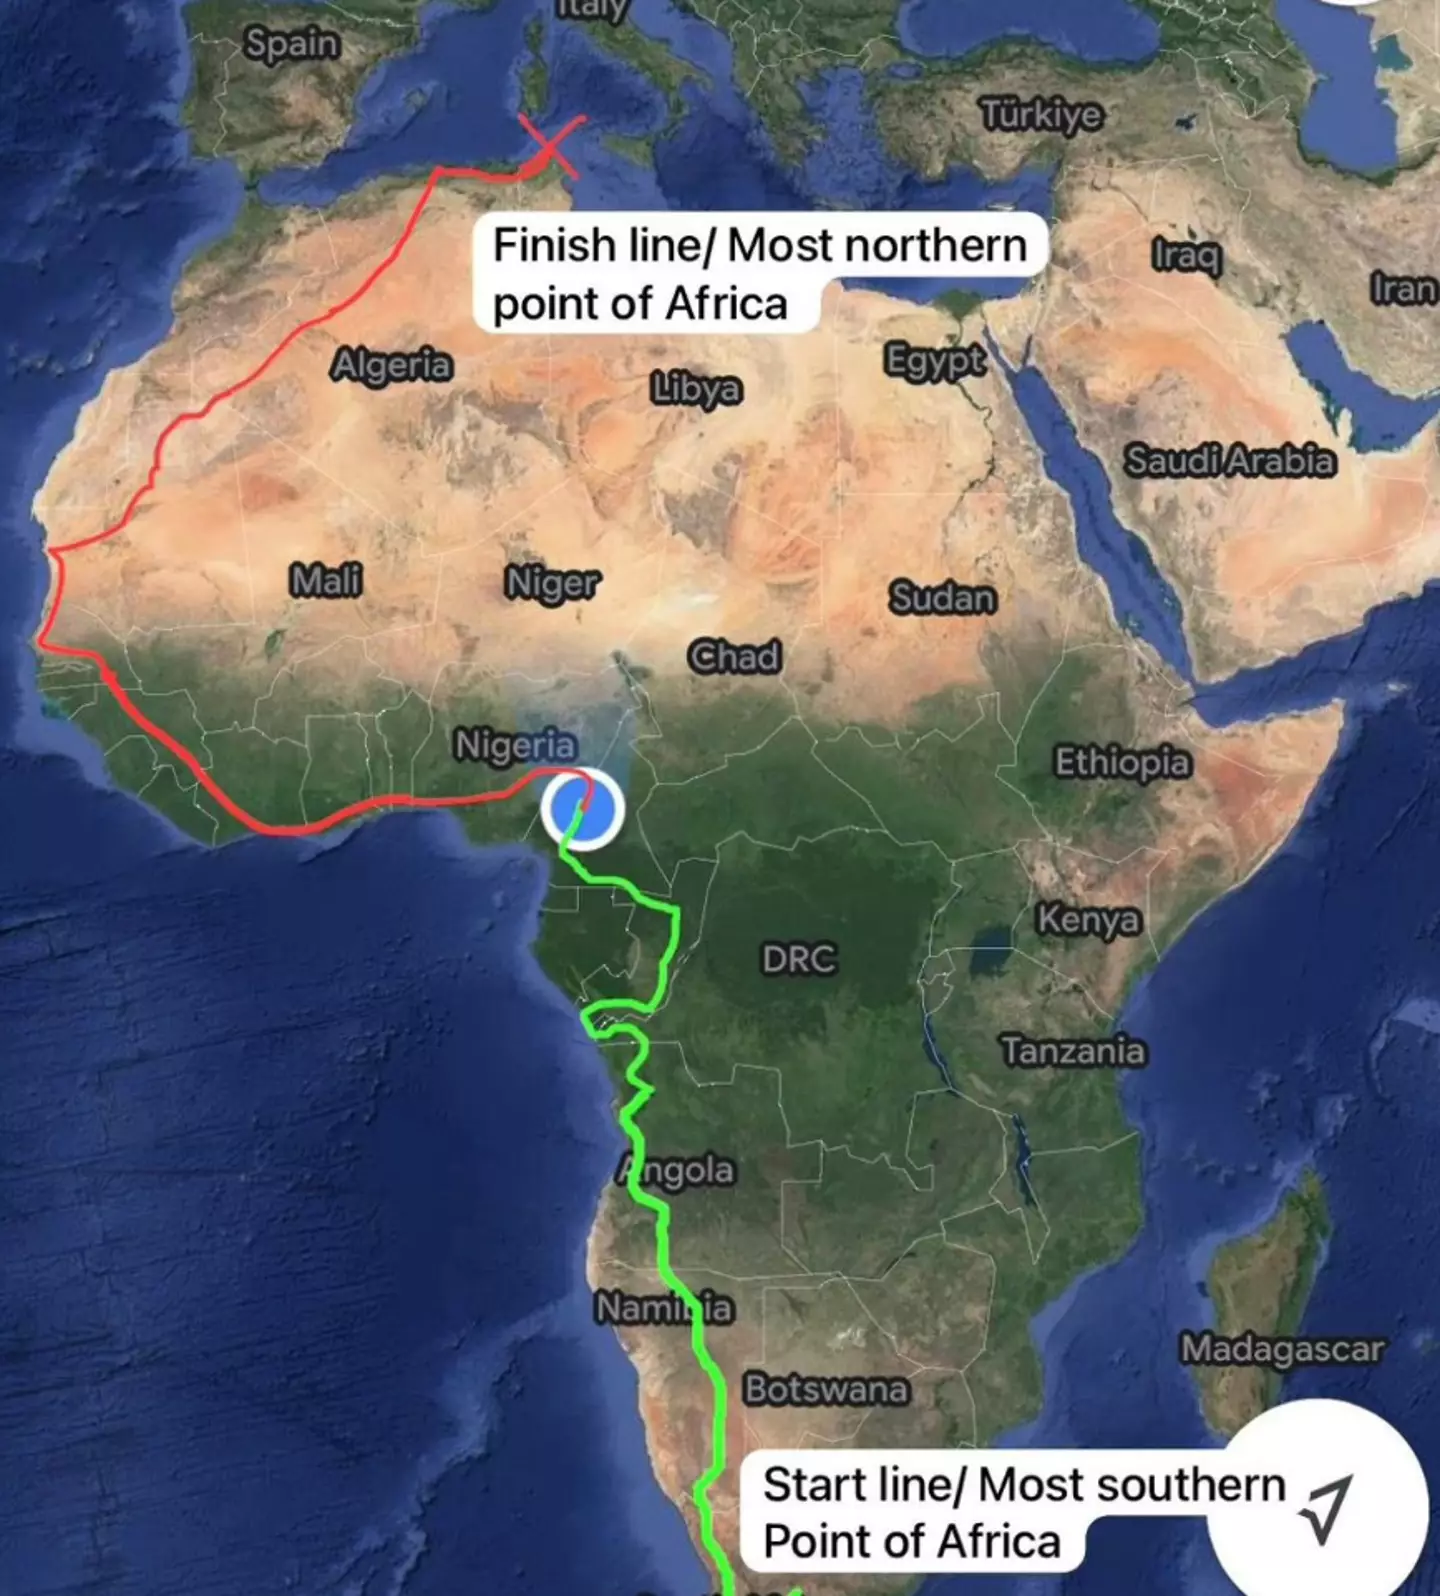 Russell is approaching Nigeria after nearly six months of running.